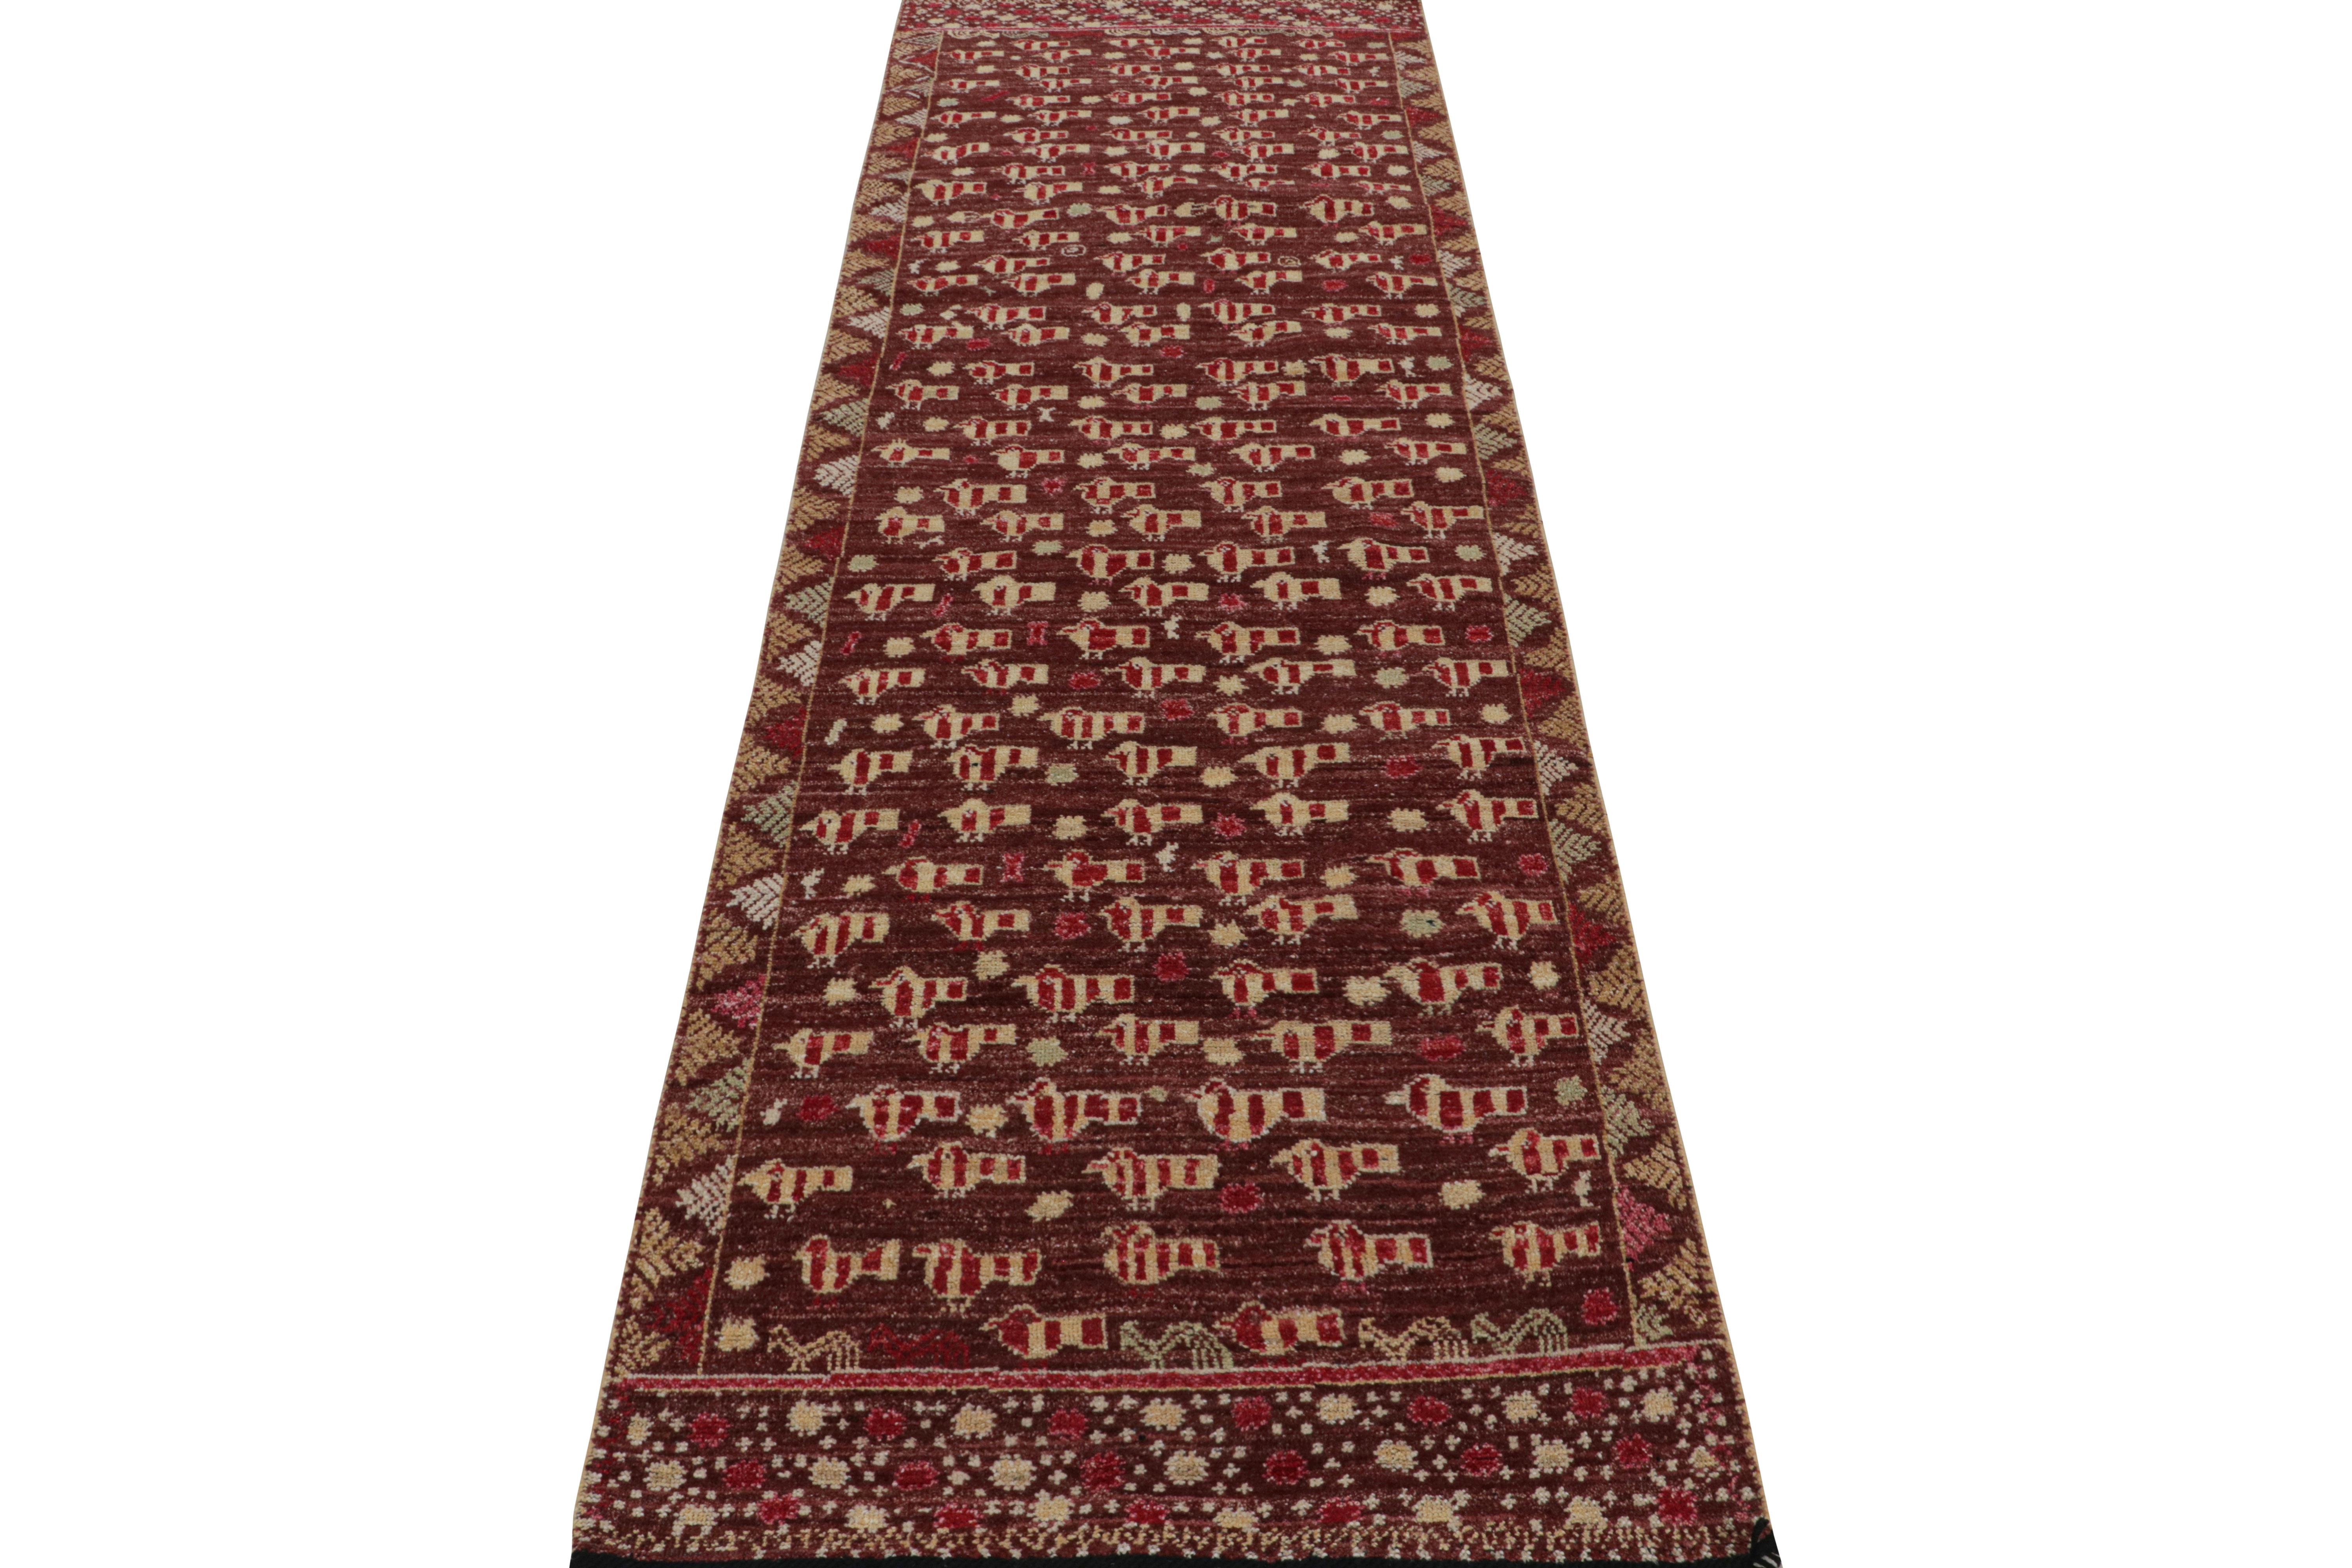 Modern Rug & Kilim’s Moroccan Style Runner Rug in Orange with Geometric Patterns For Sale